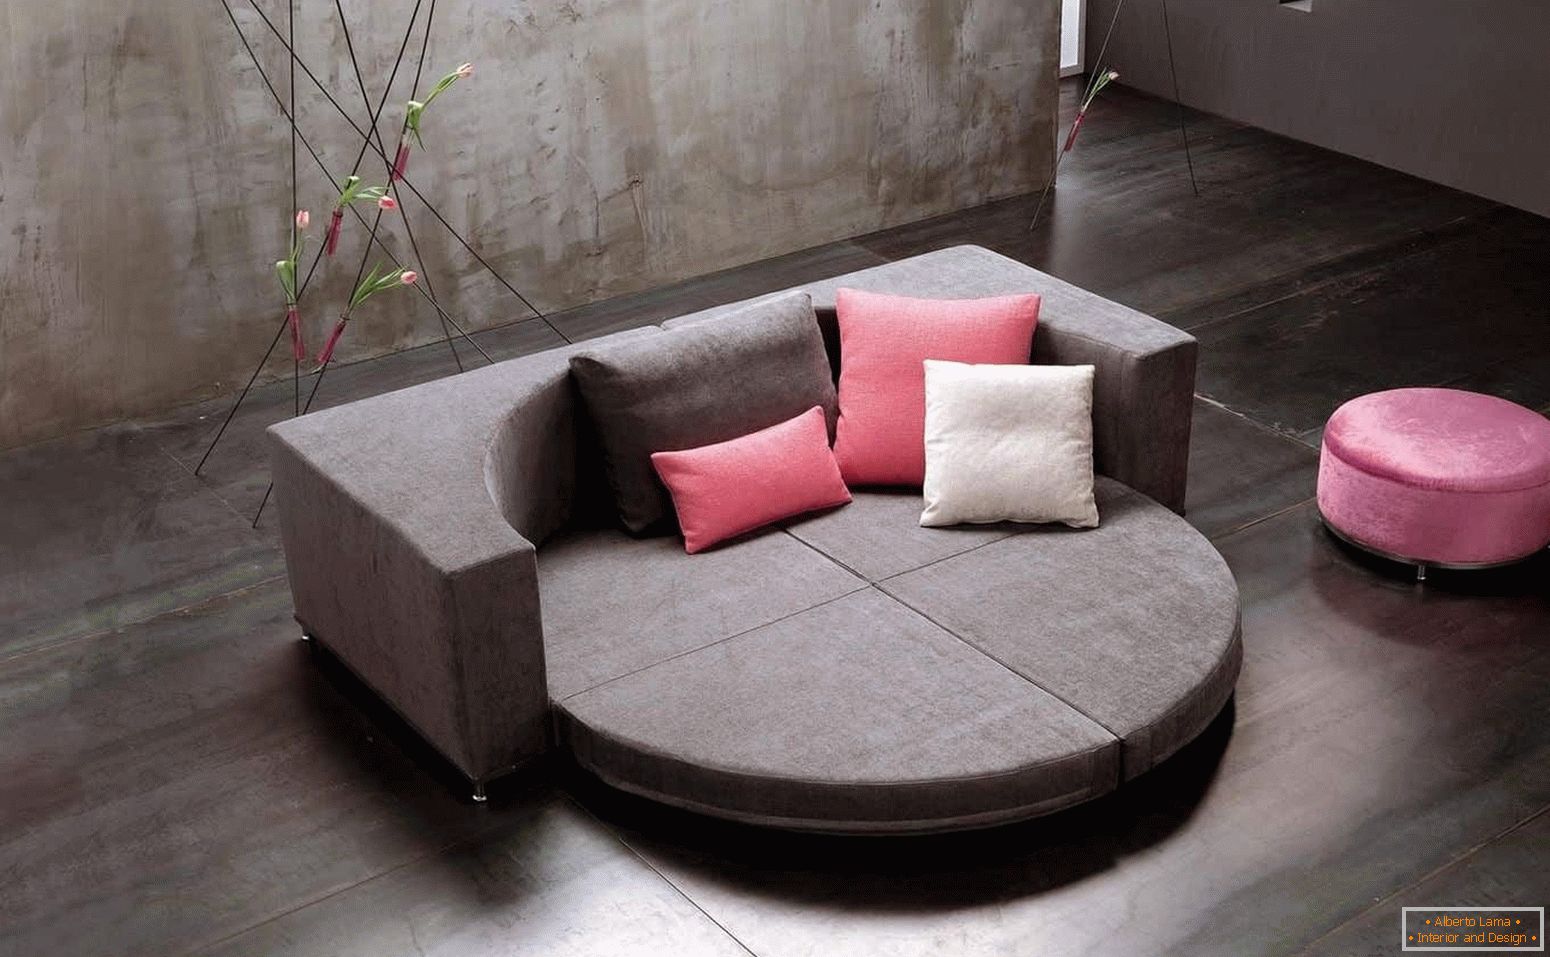 Folding sofa with a round bed